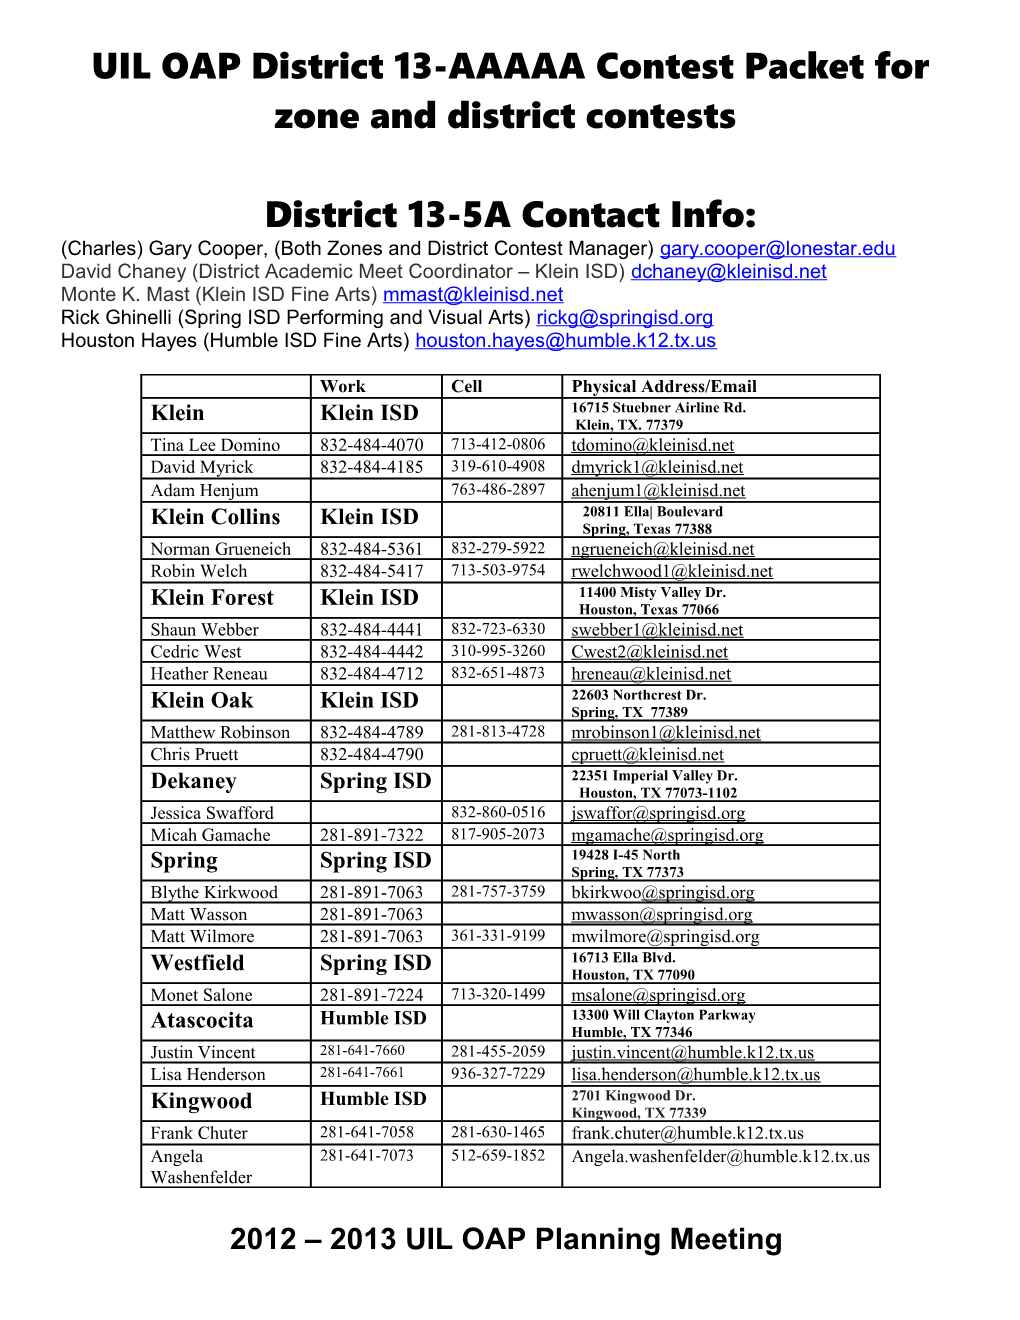 UIL OAP District 13-AAAAA Contest Packet for Zone and District Contests